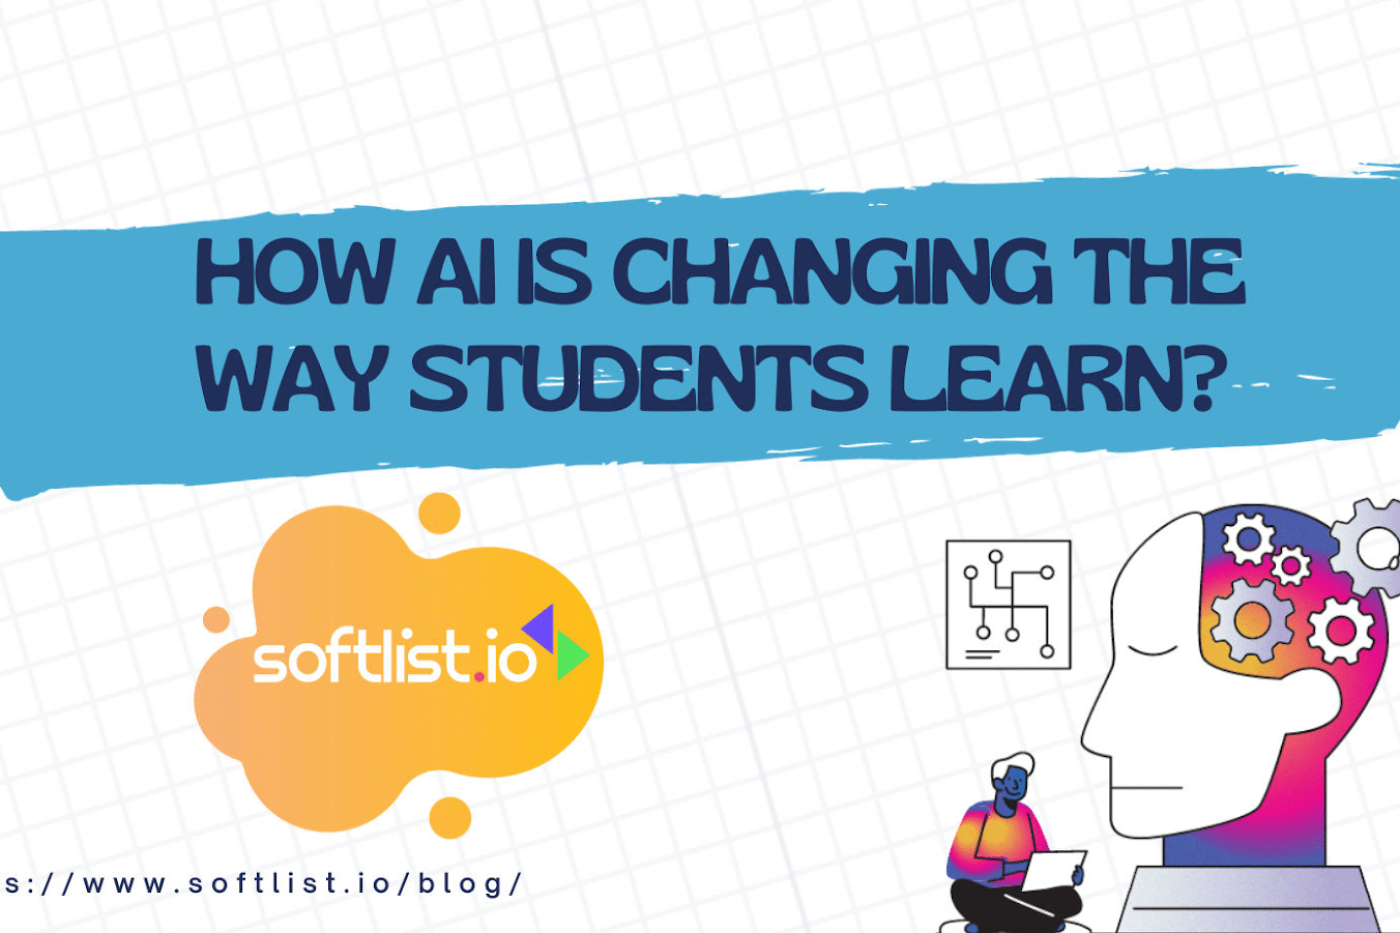 How Artificial Intelligence is Impacting the Way Students Learn